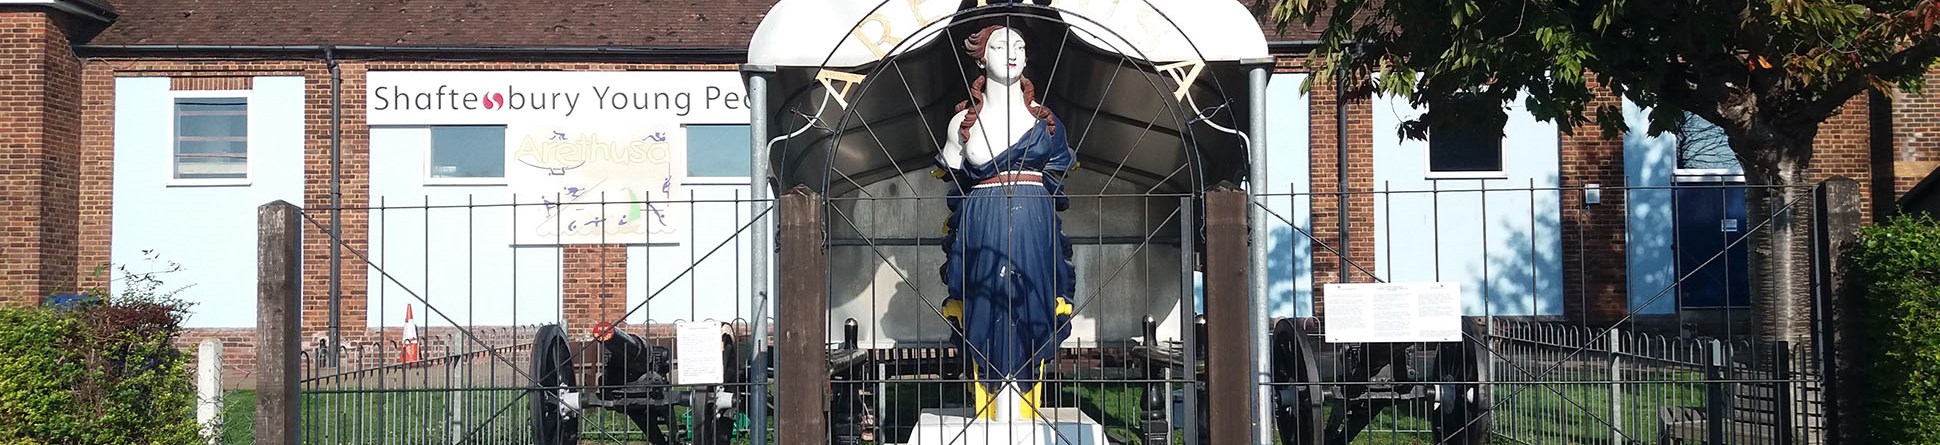 Front view of figurehead enclosed by metal railings